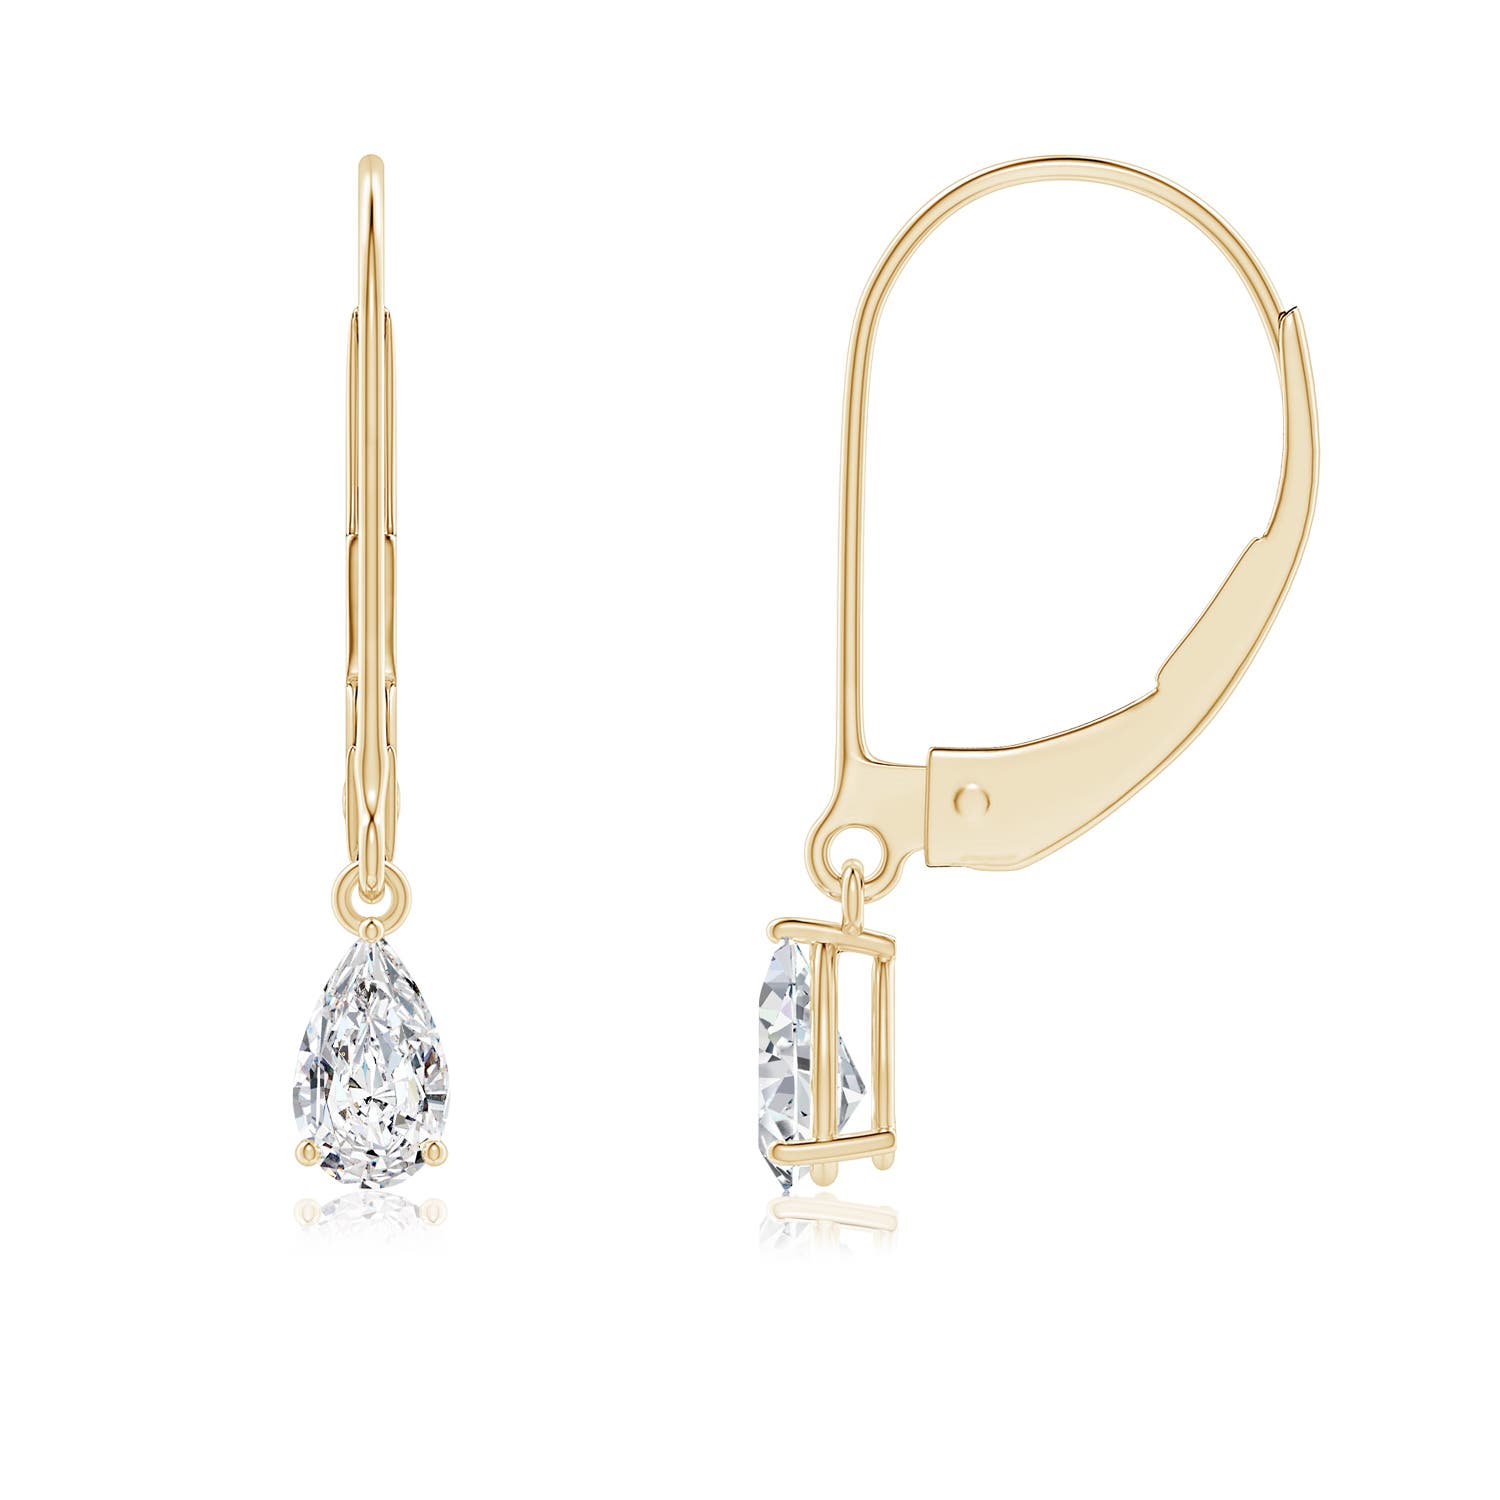 H, SI2 / 0.4 CT / 14 KT Yellow Gold